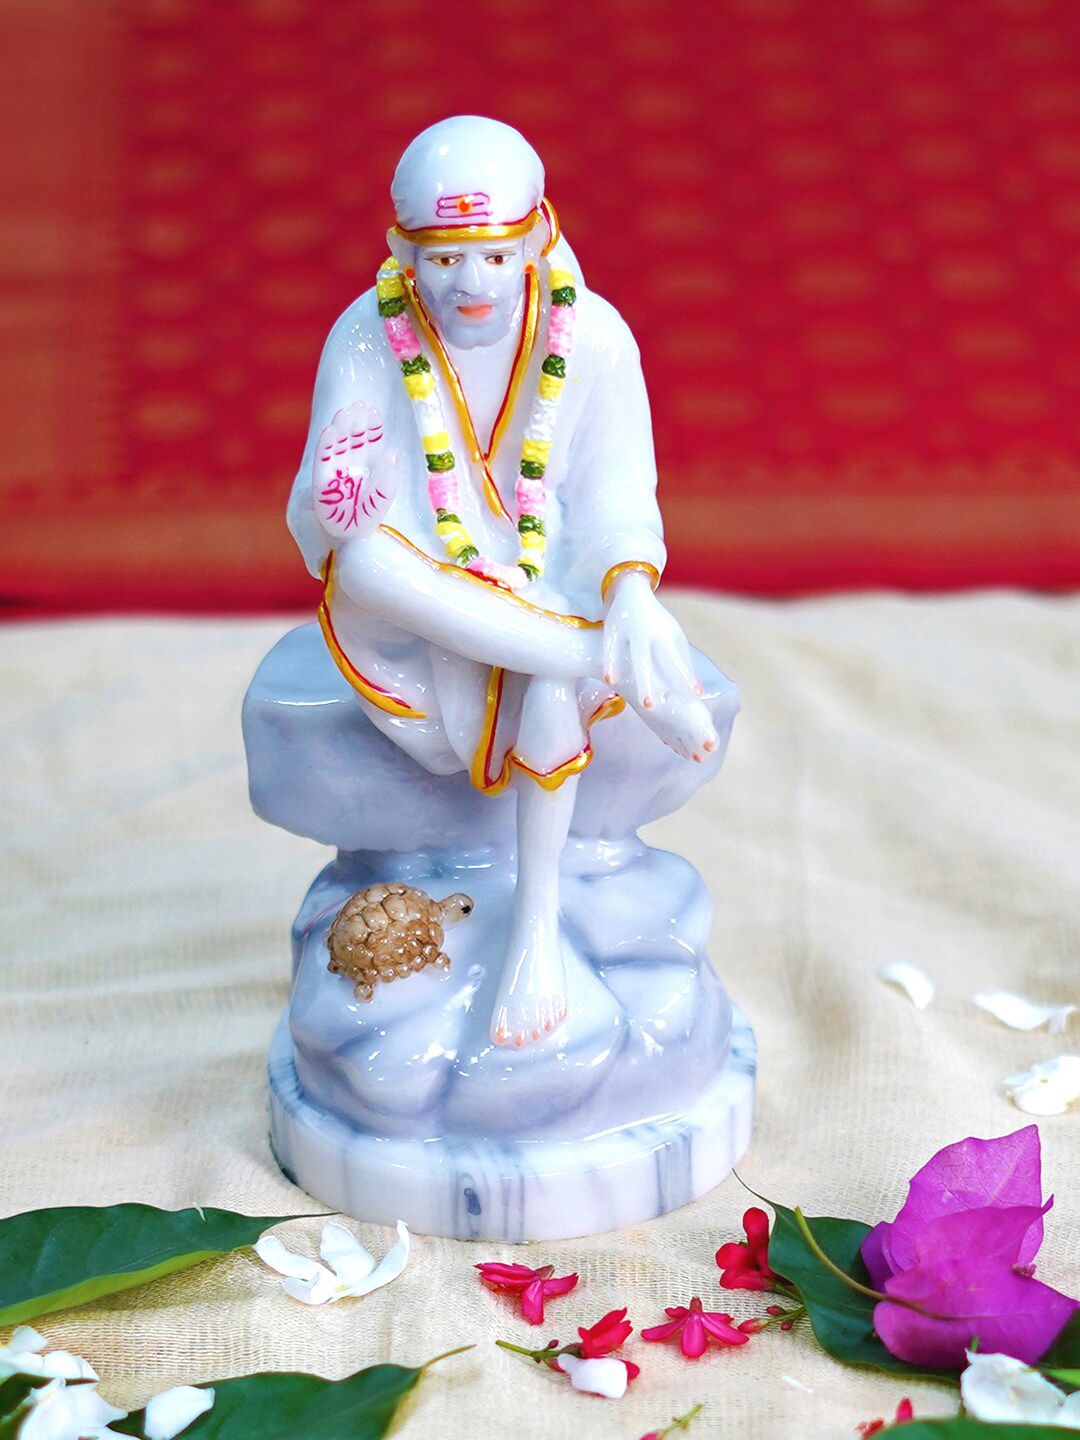 Gallery99 White & Gold-Toned Sai Baba Idol Showpieces Price in India